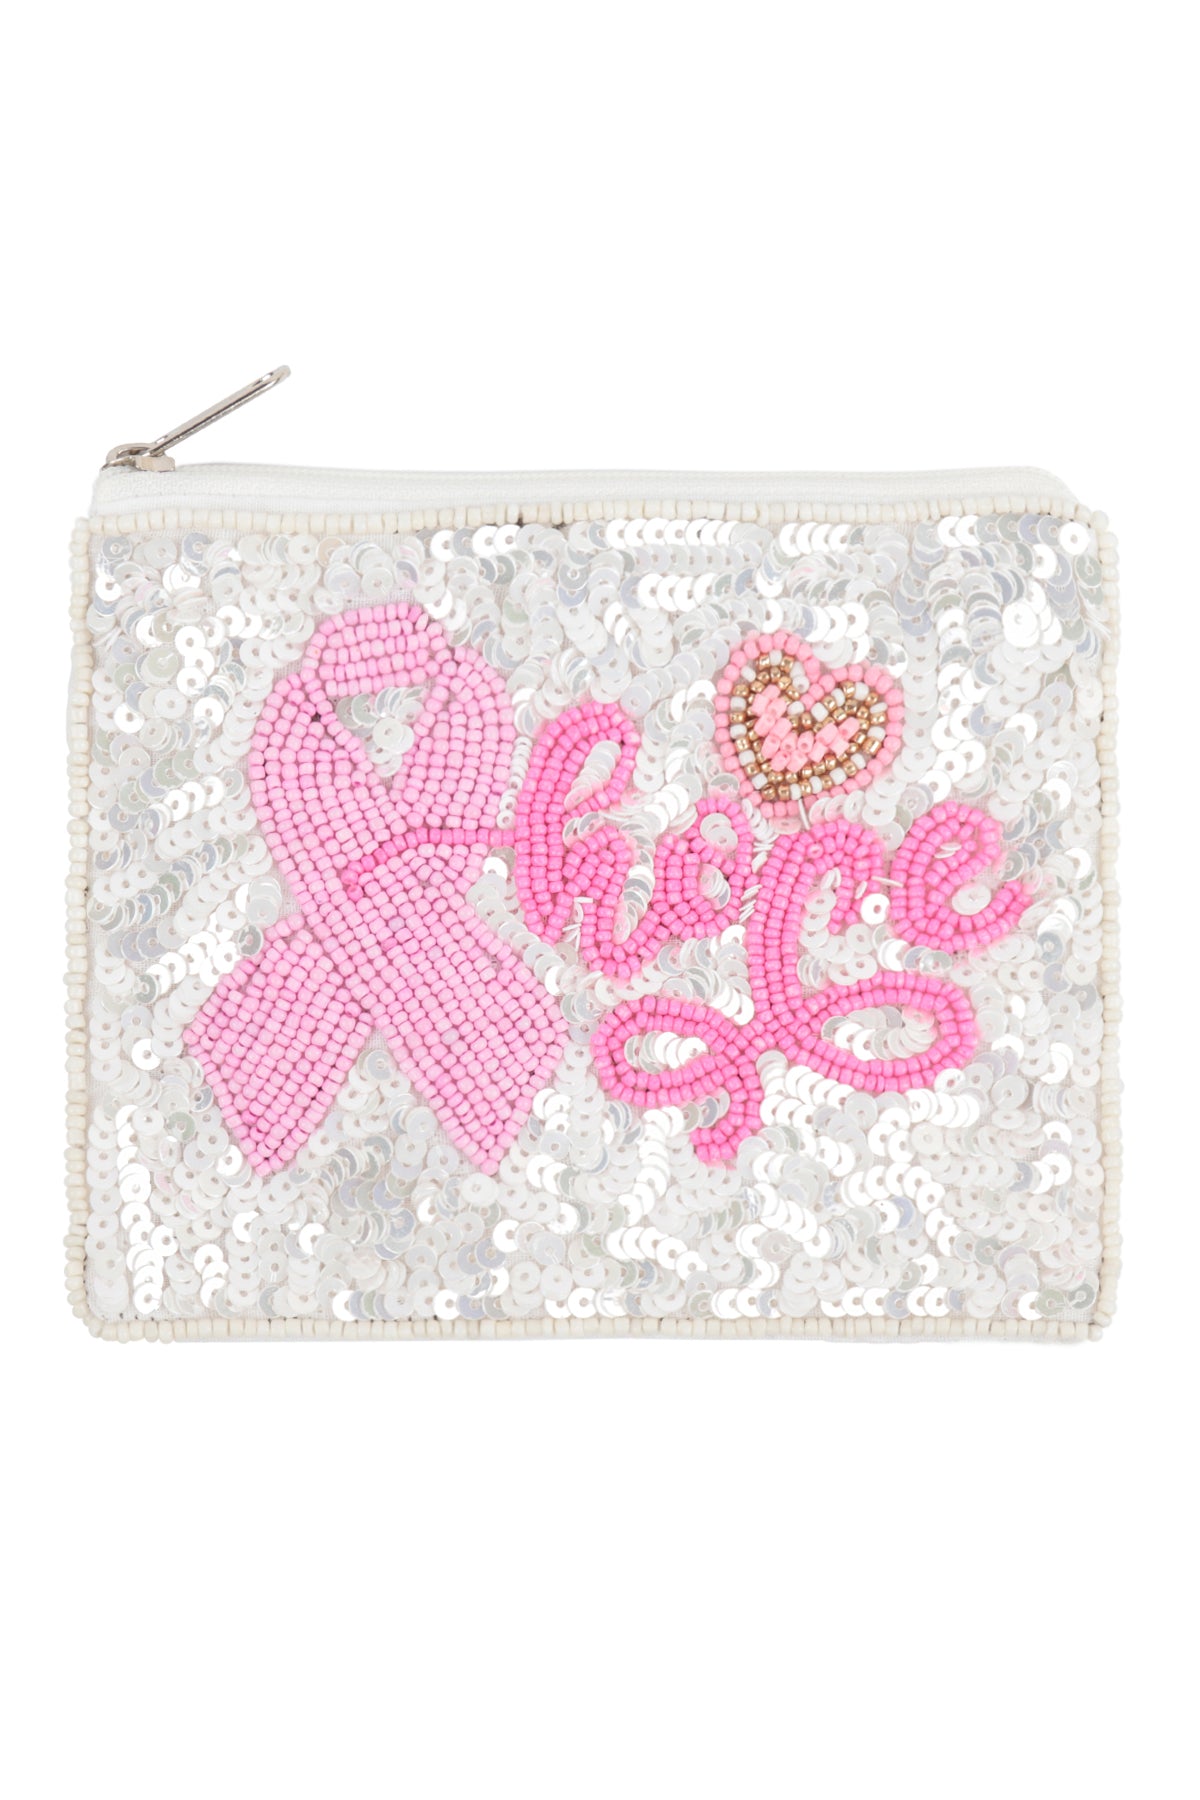 HOPE PINK RIBBON AWARENESS SEQUIN AND SEED BEADS COIN POUCH-WHITE